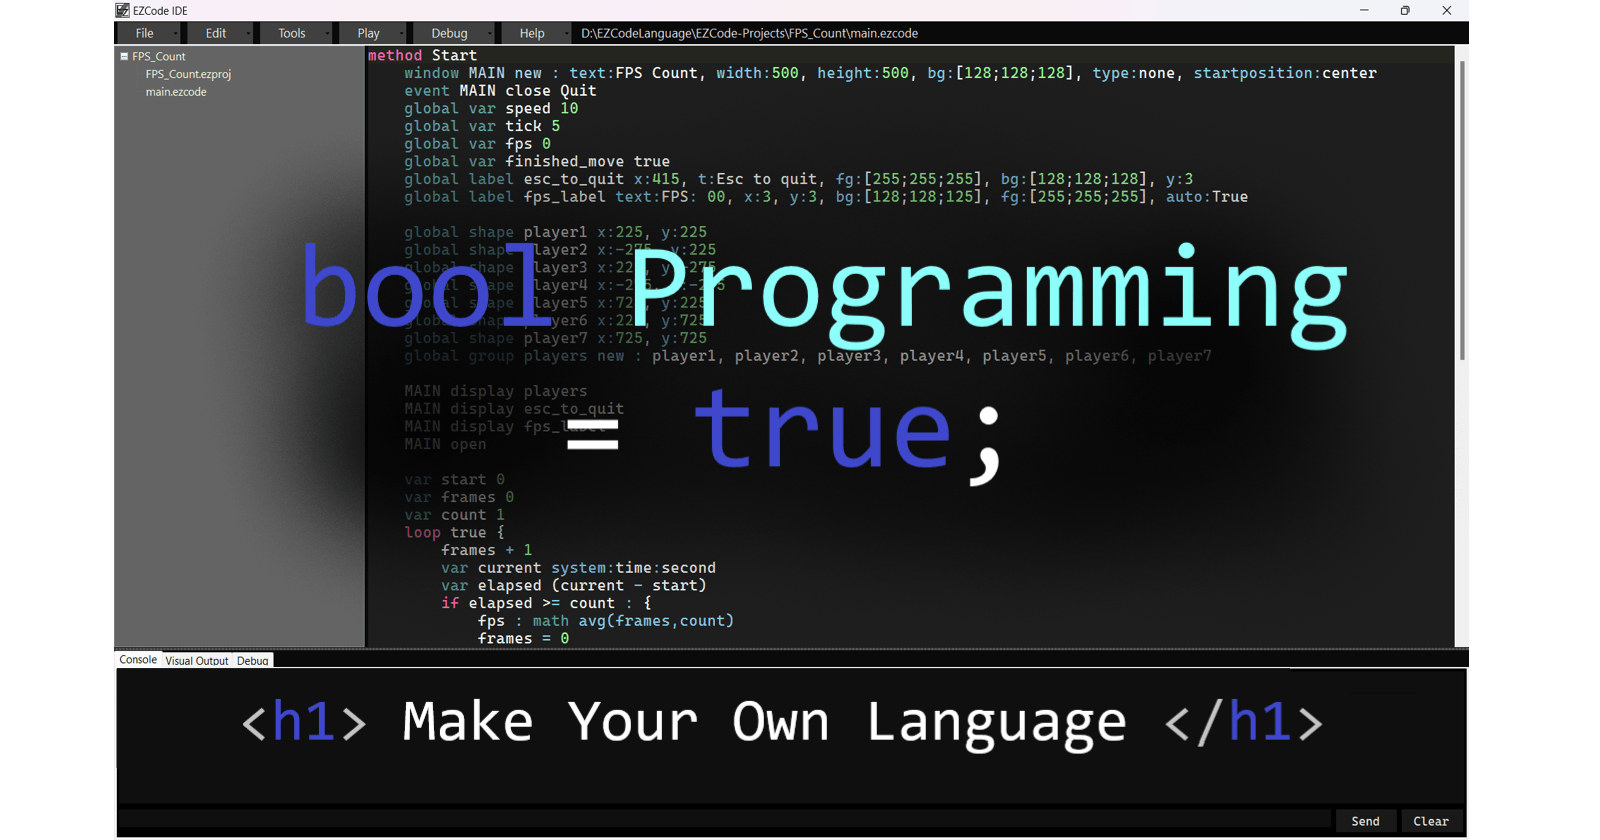 Every Programmer Should Build Their Own Programming Language